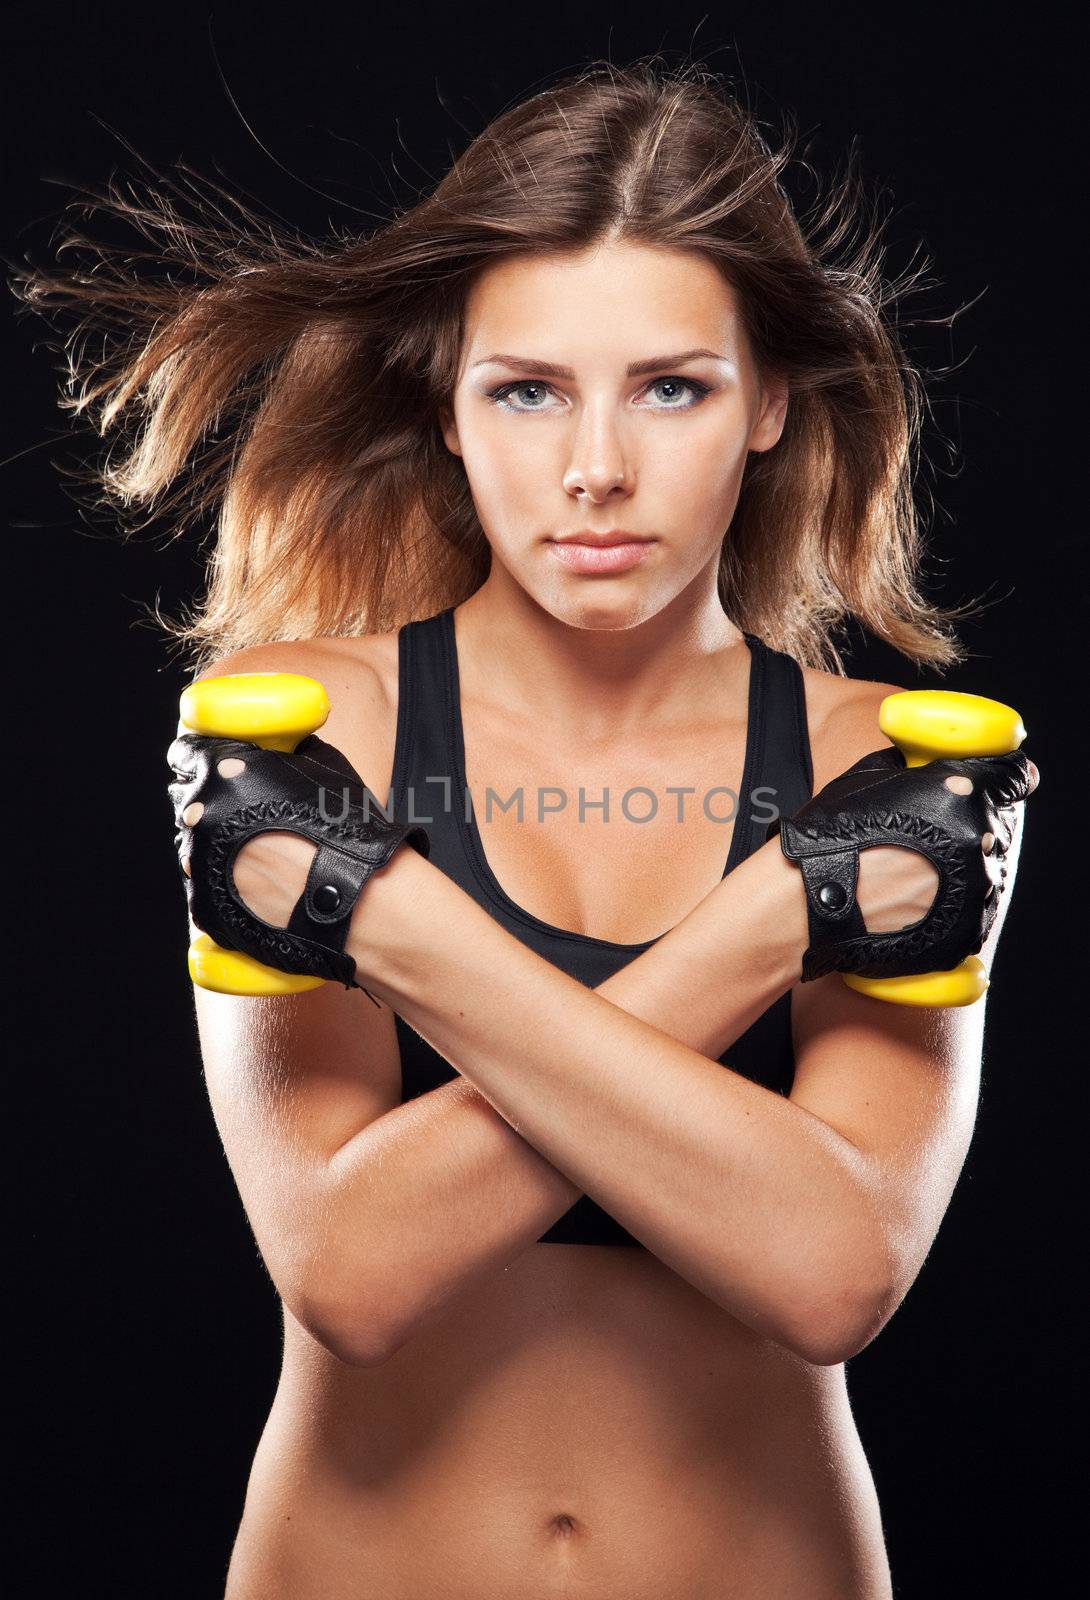 Young fit woman in sports outfit, black background